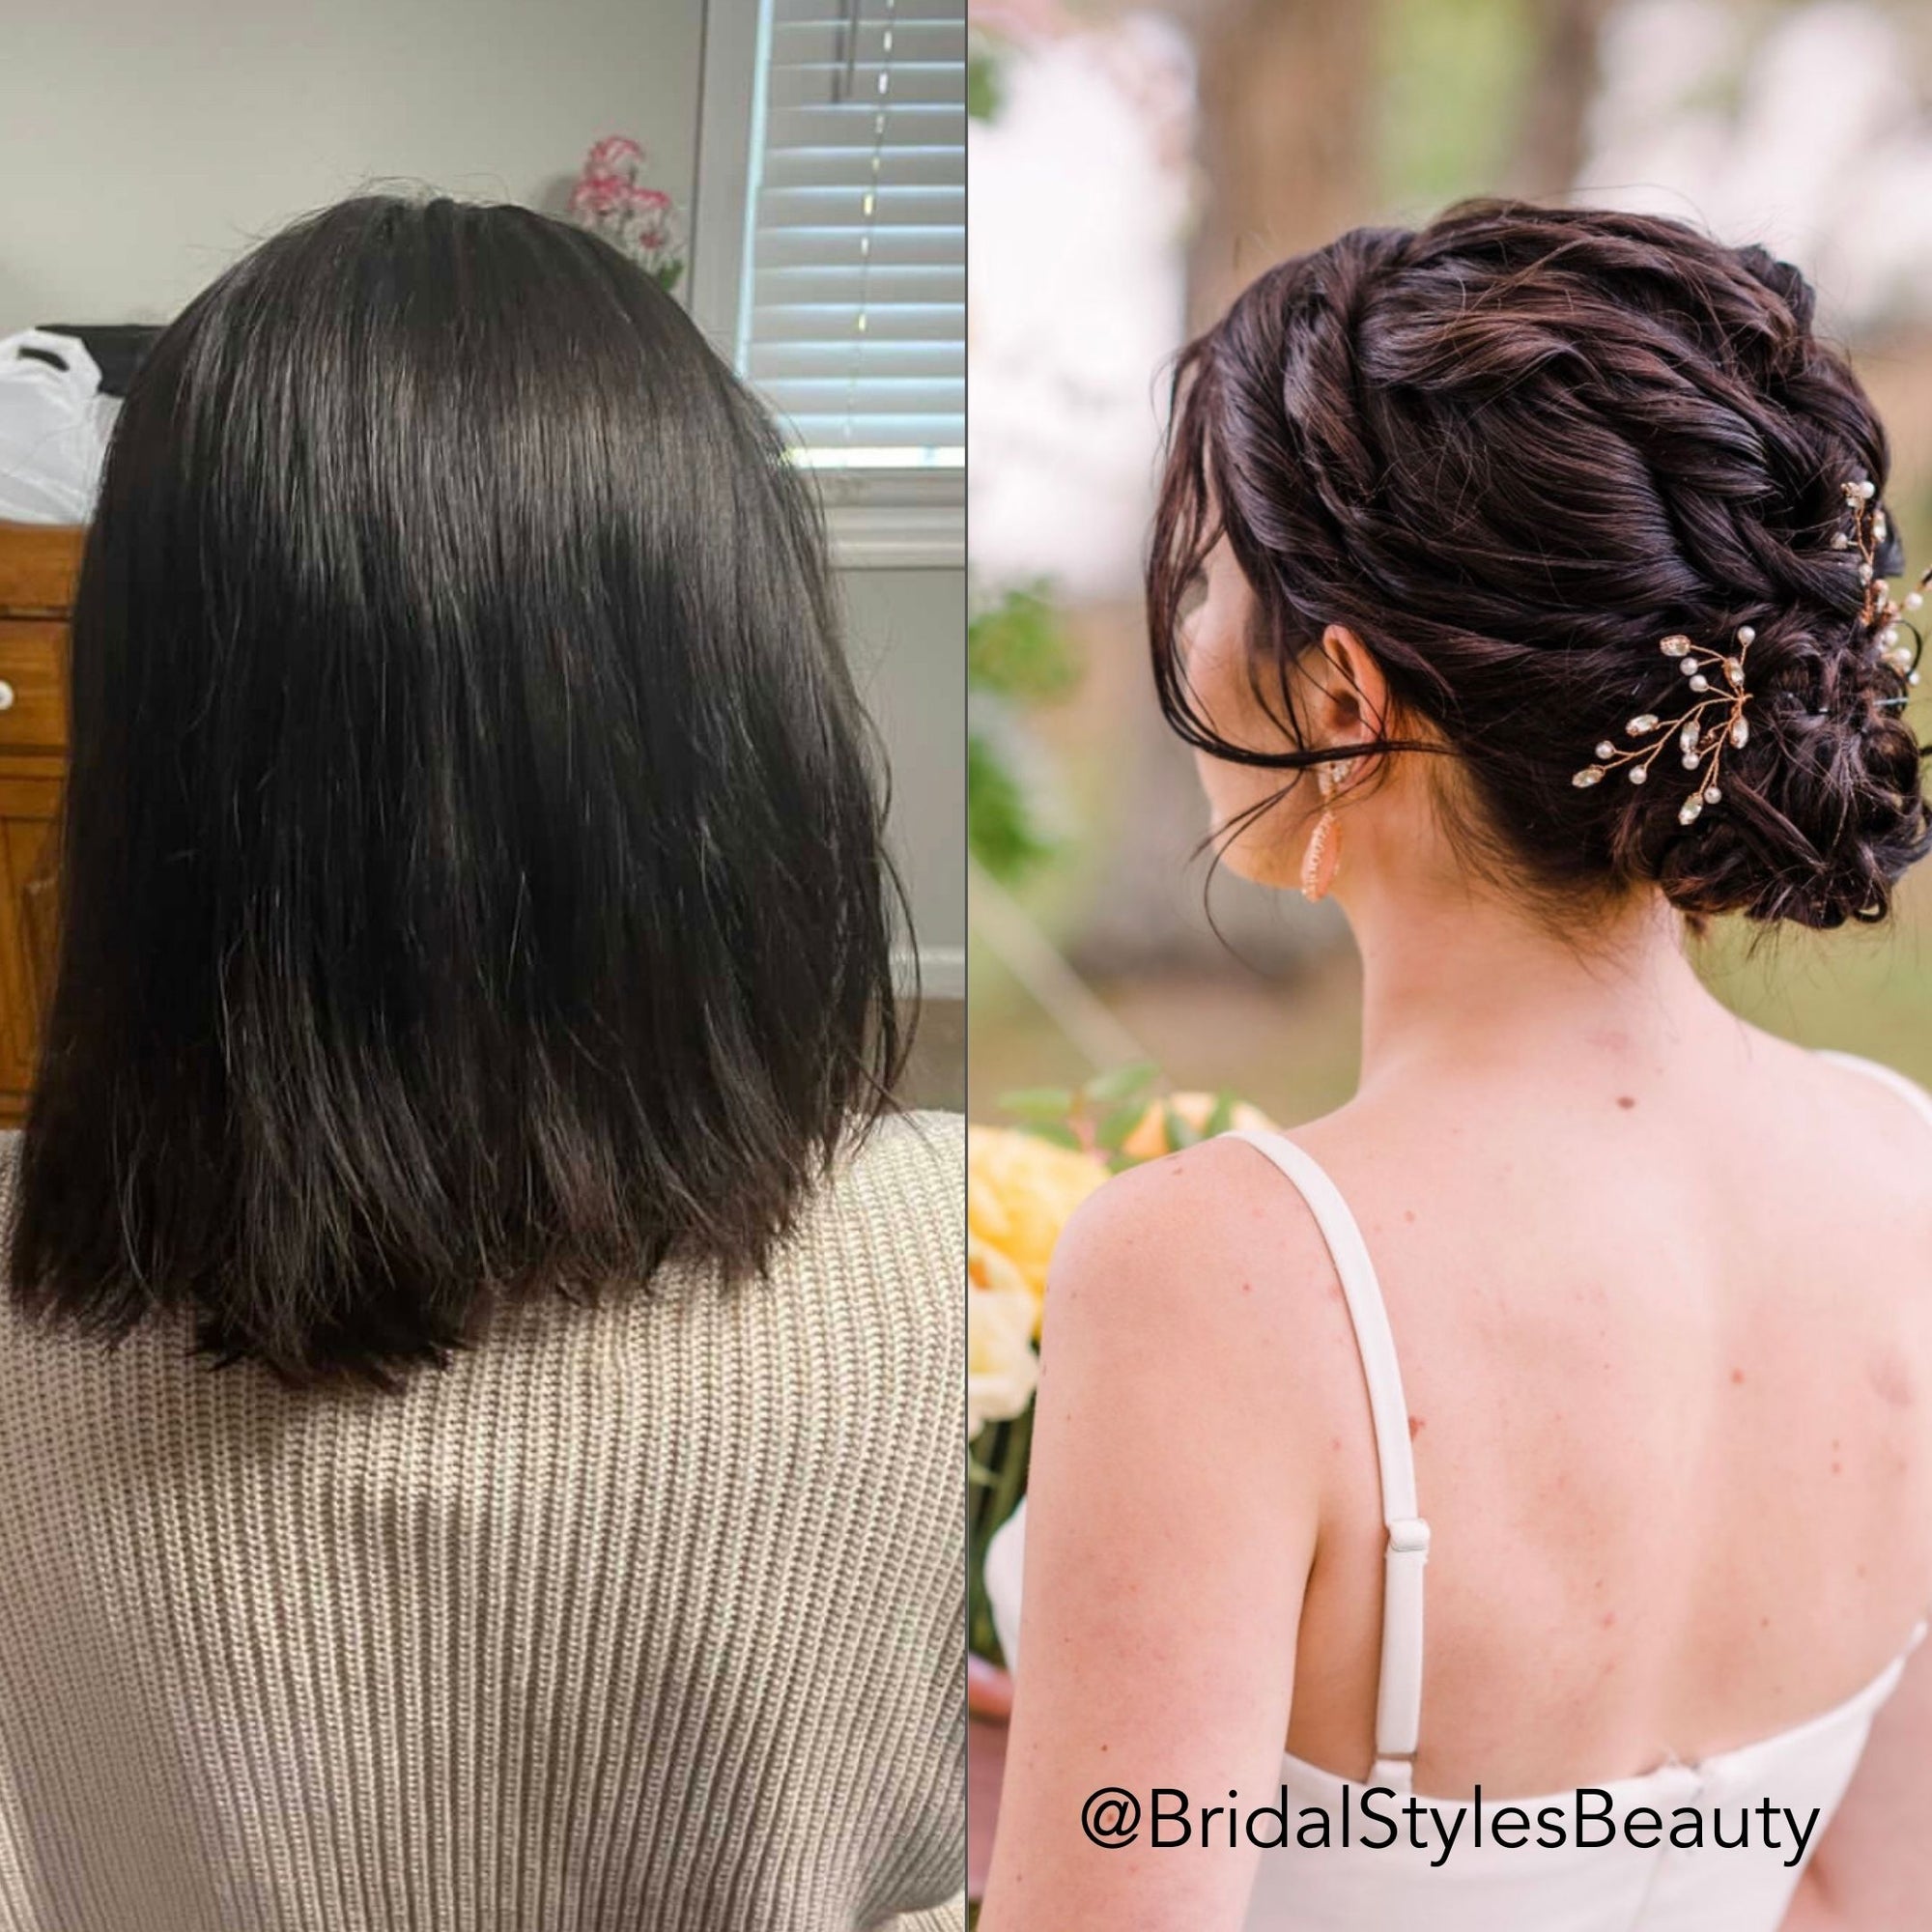 Transformational Before After of Bride with Short Hair and a Beautiful Short Hair Updo styled by Bridal Styles Beauty